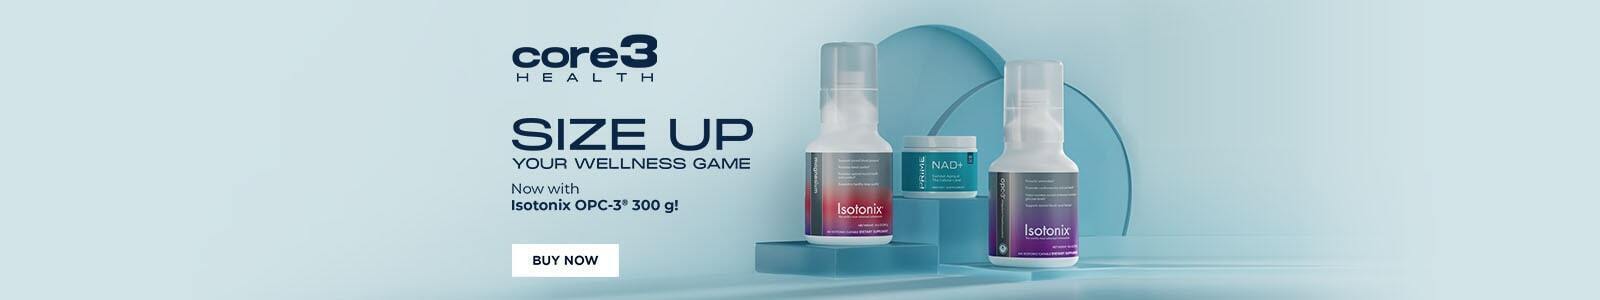 Size Up Your Wellness Game Now with Isotonix OPC-3® 300 g! BUY NOW